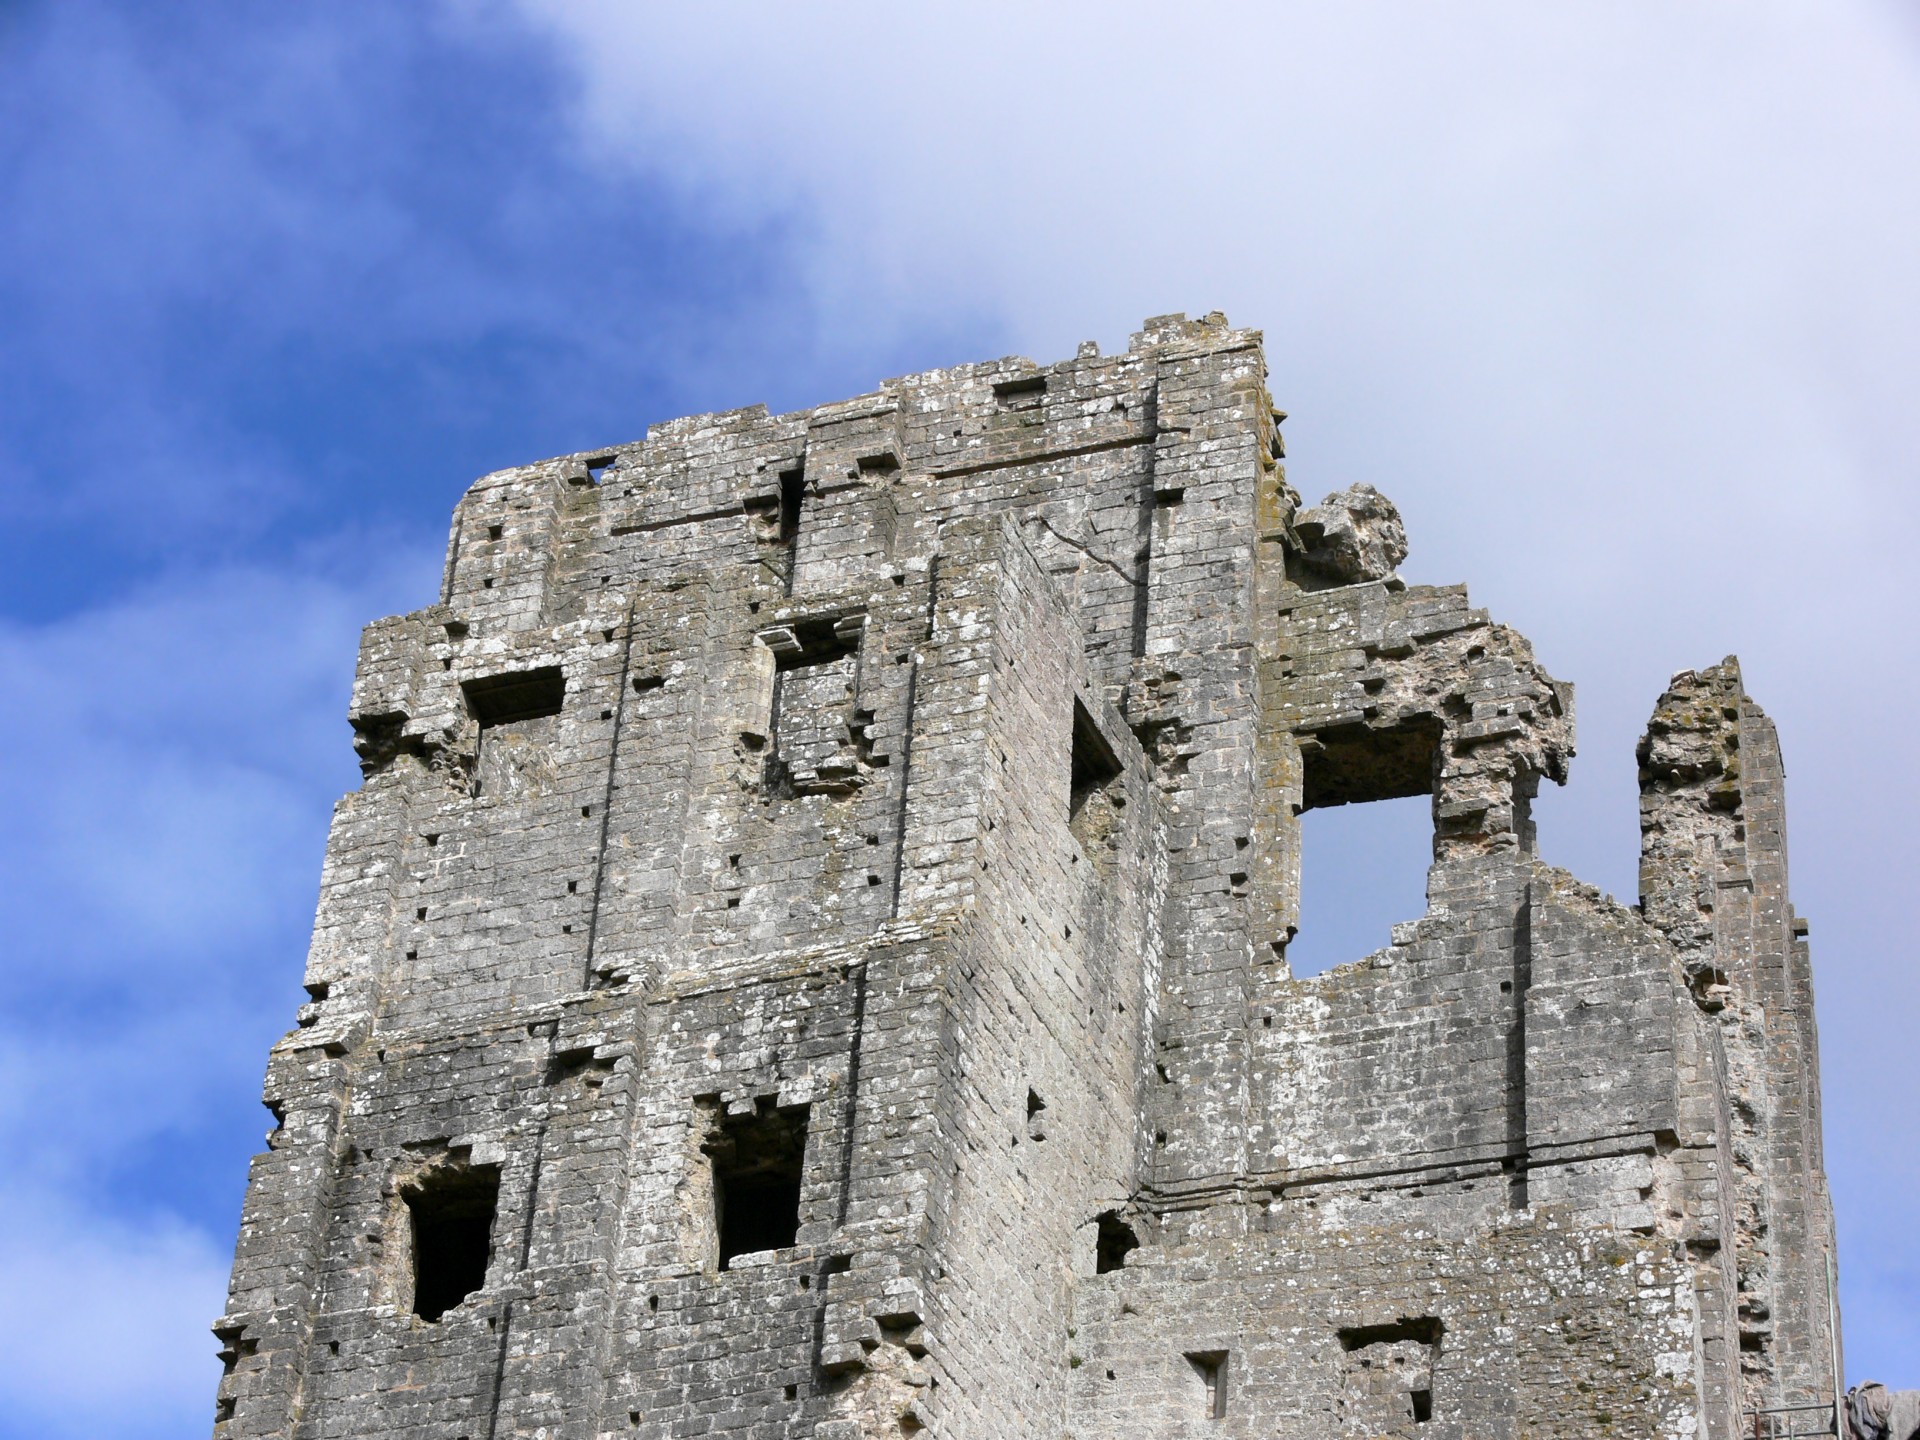 Ruins of Corfe Castle, highest section of castle remaining